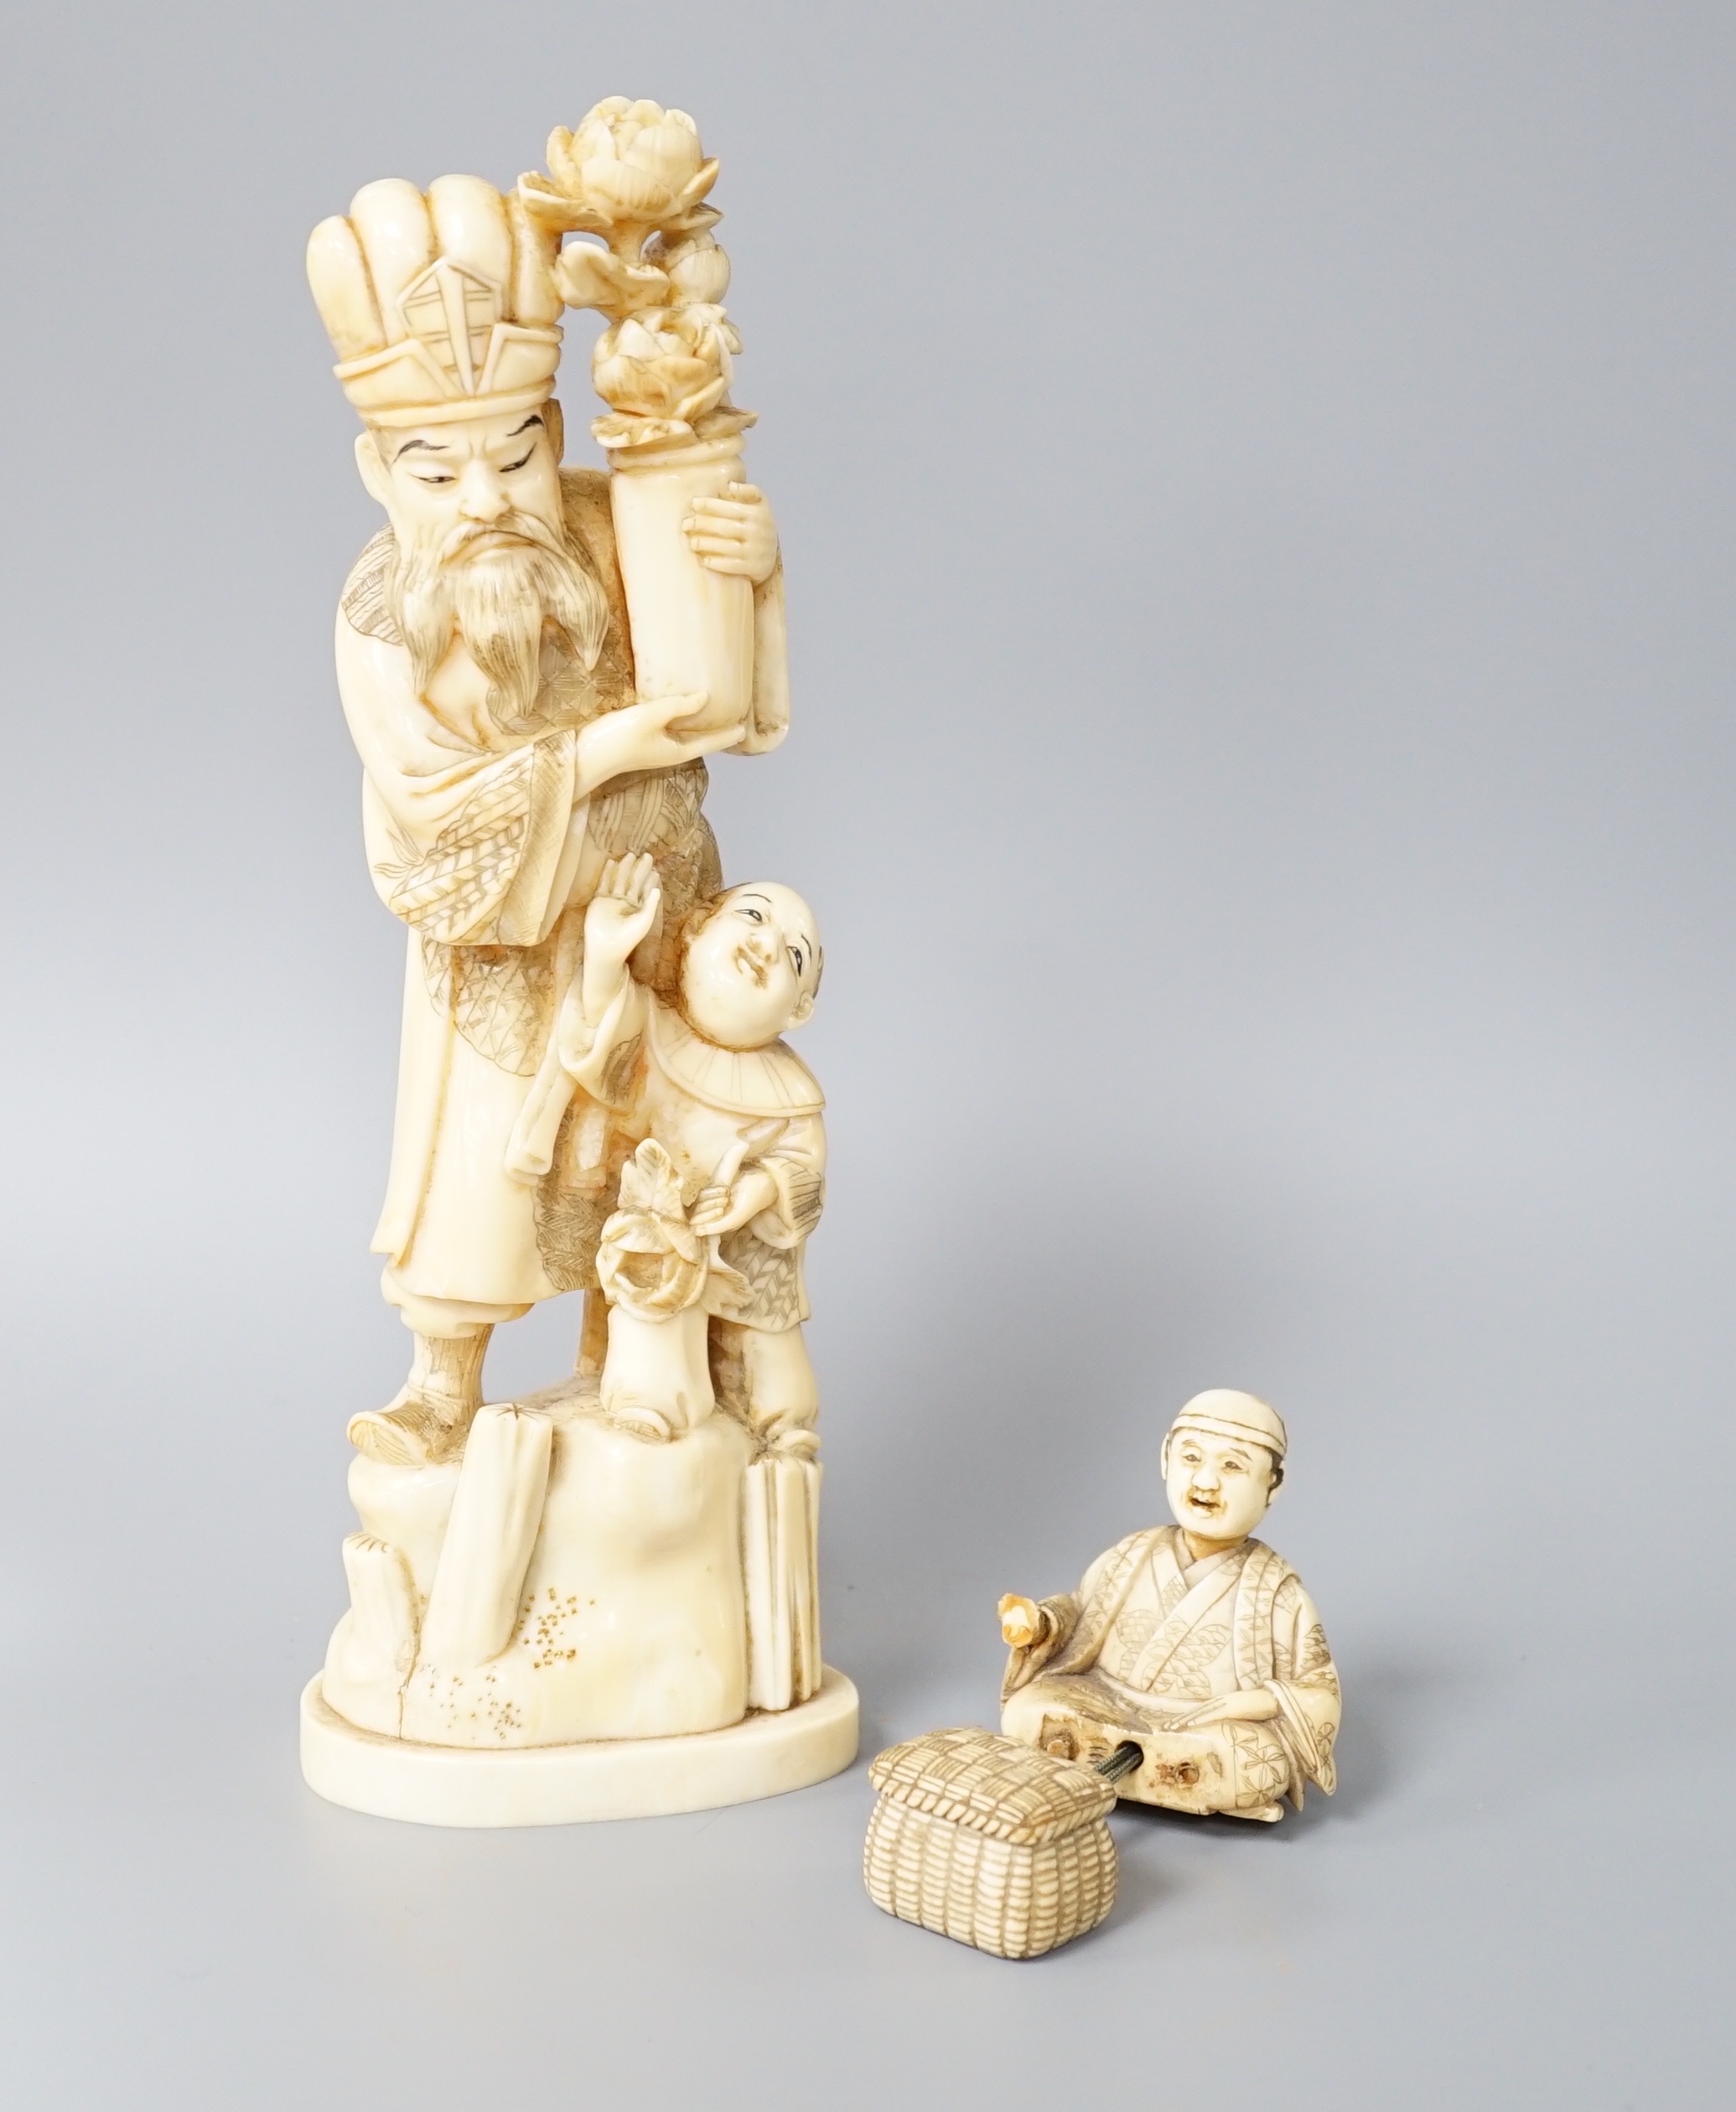 A 19th century Japanese marine ivory okimono of a bearded man and child together with a similar